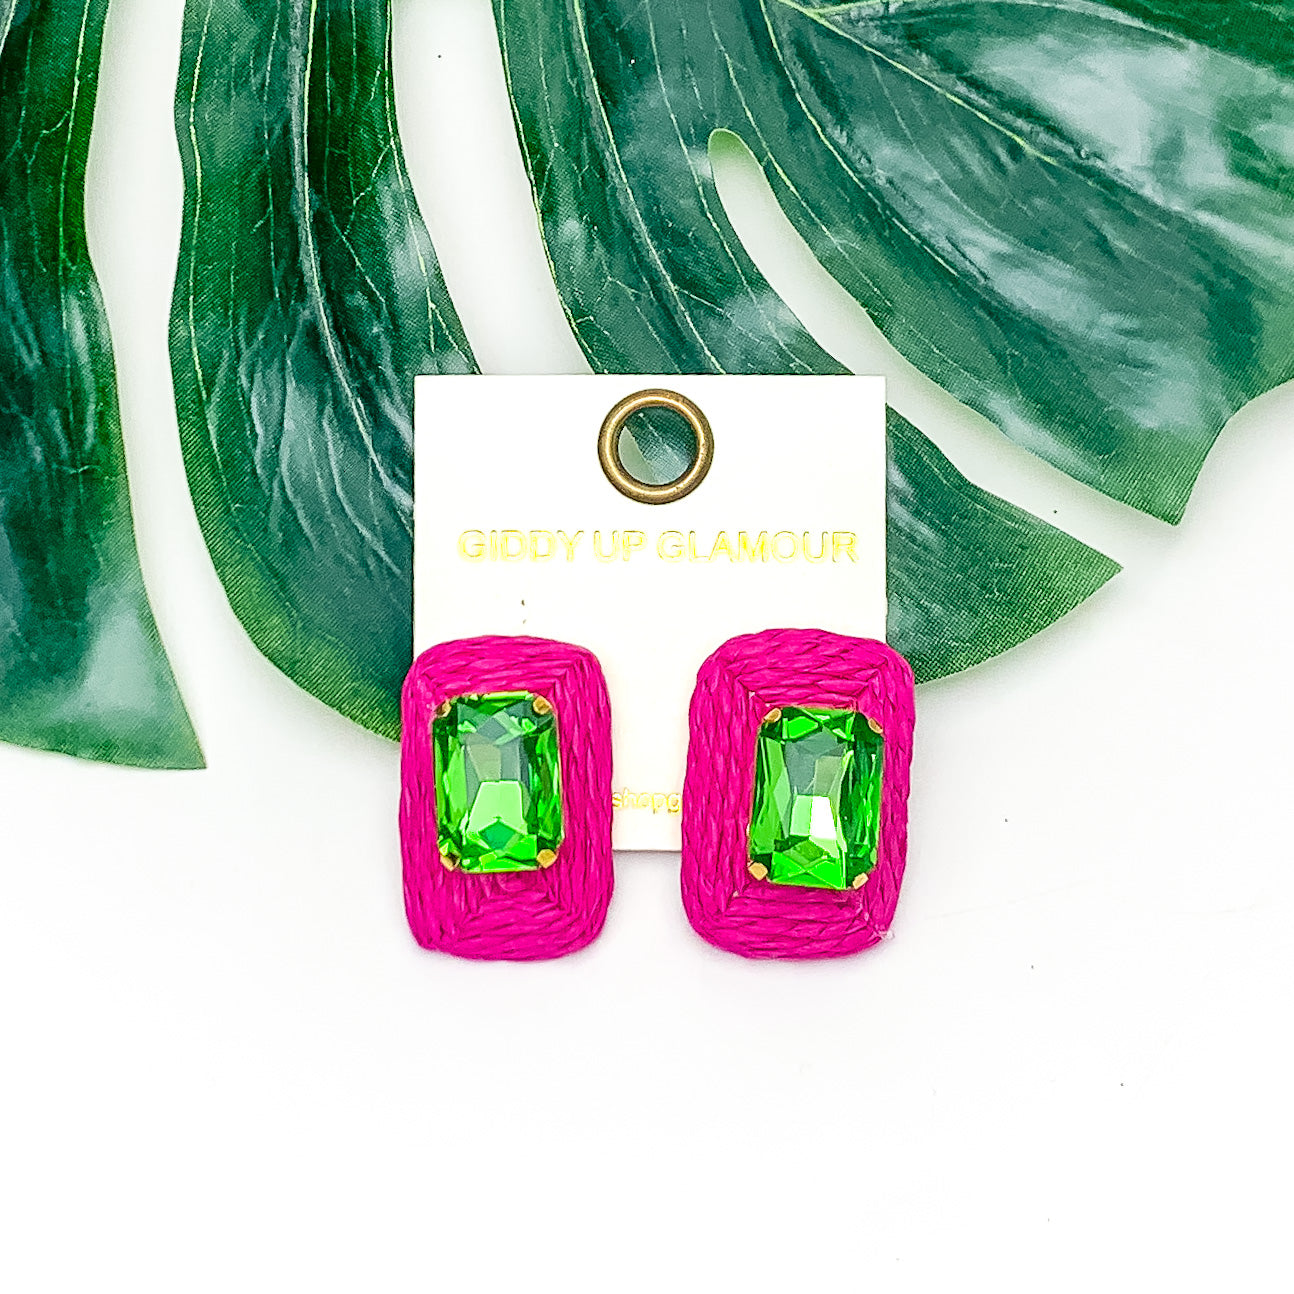 Truly Tropical Raffia Rectangle Earrings in Hot Pink With Green Crystal. Pictured on a white background with the earrings laying on a large leaf.